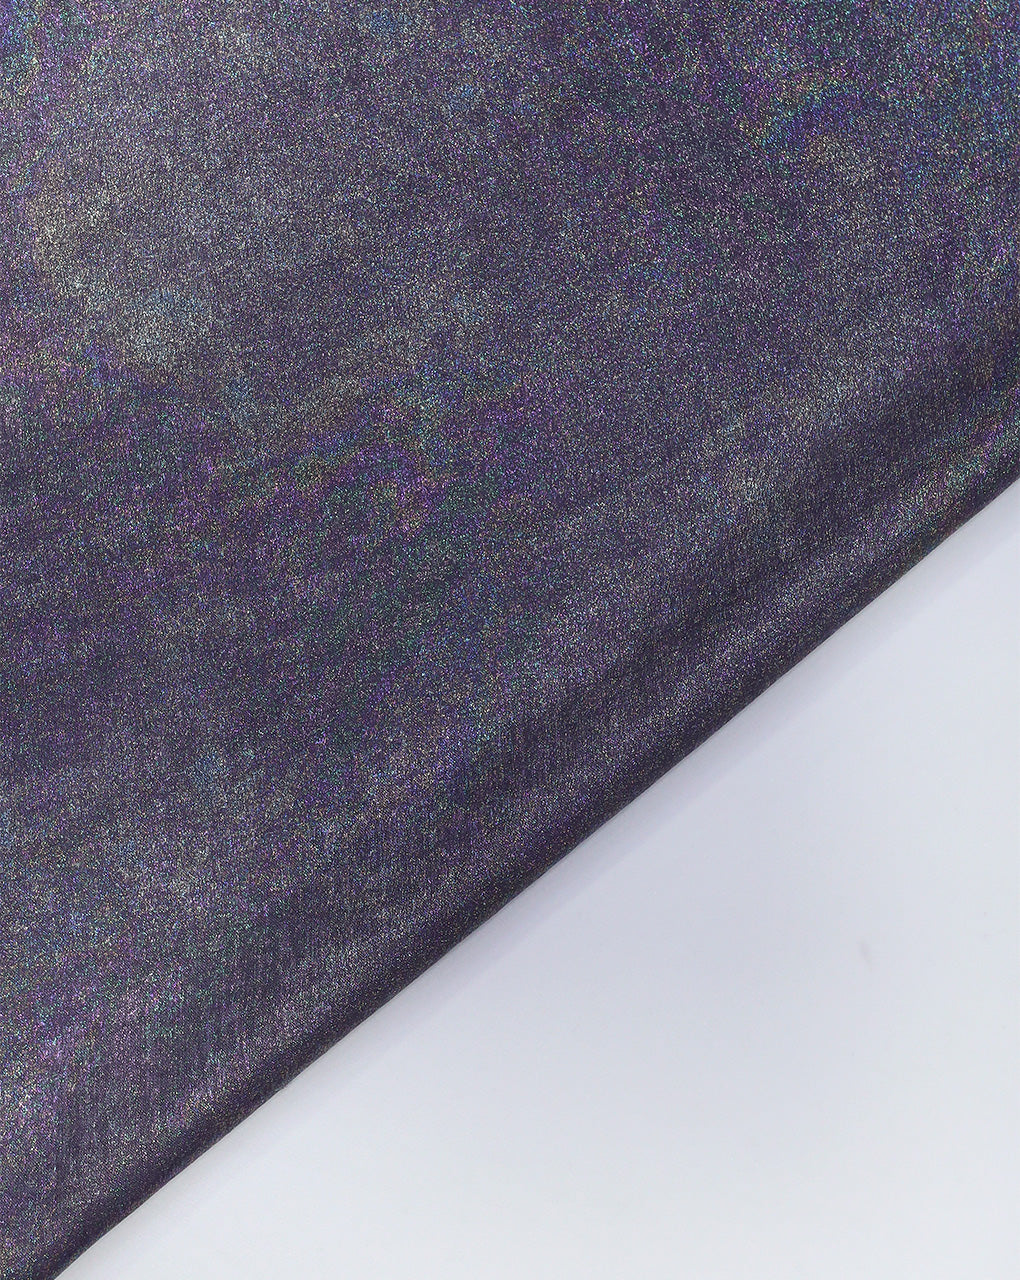 PURPLE MAUVE POLYESTER MILANO SATIN FABRIC WITH FOIL PRINTING